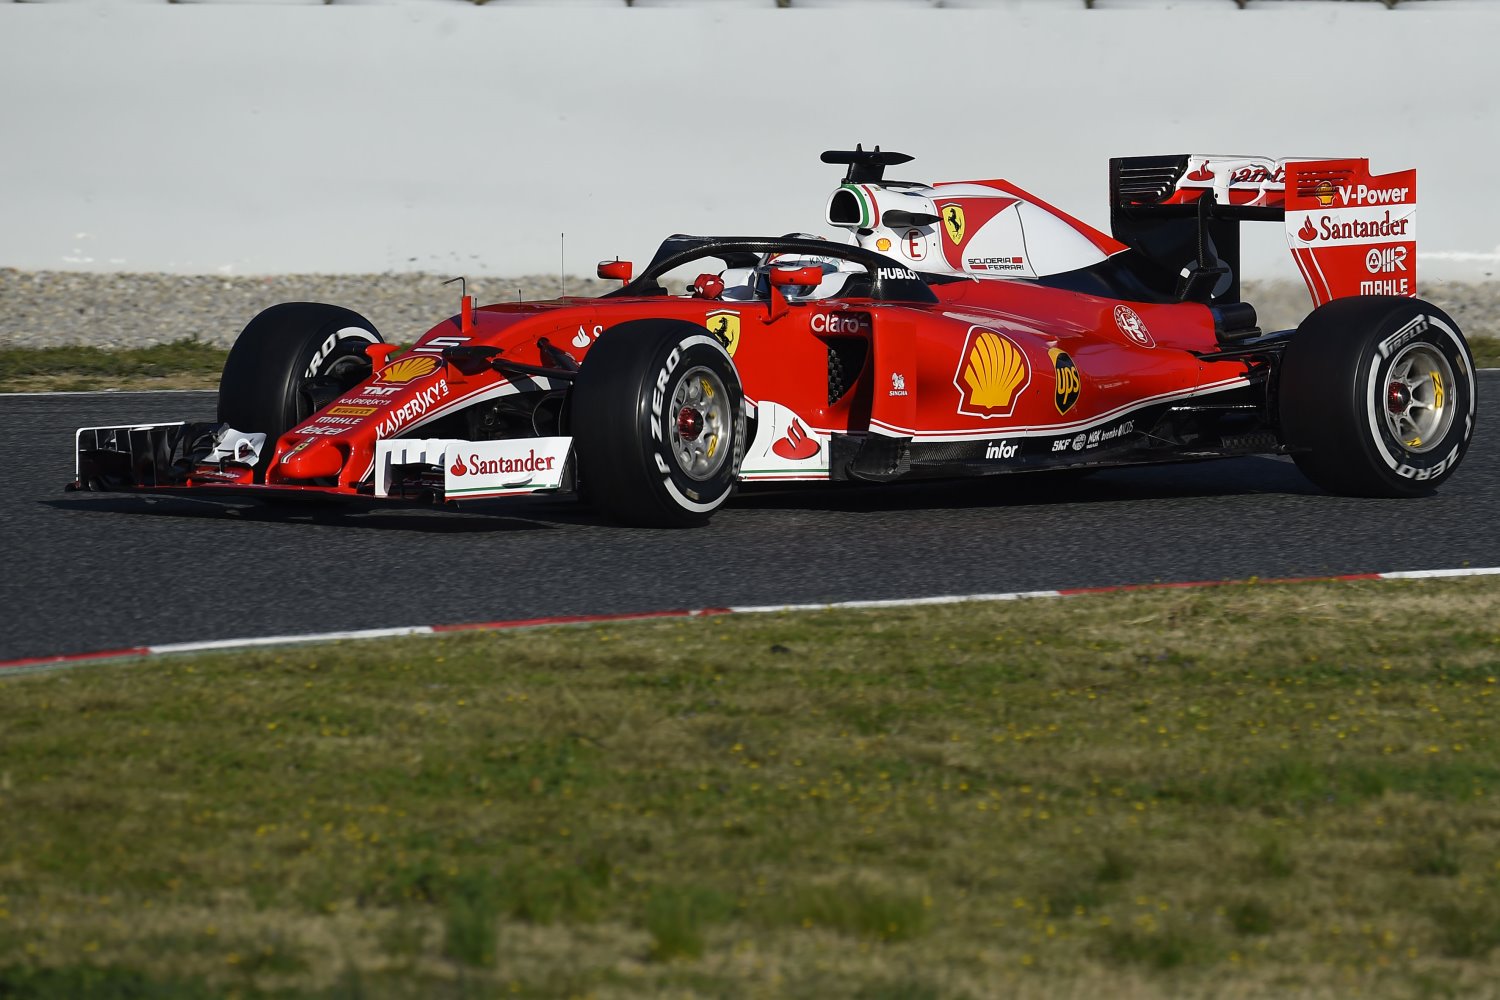 In the morning Vettel tried the Halo and said it did not really obstruct his vision